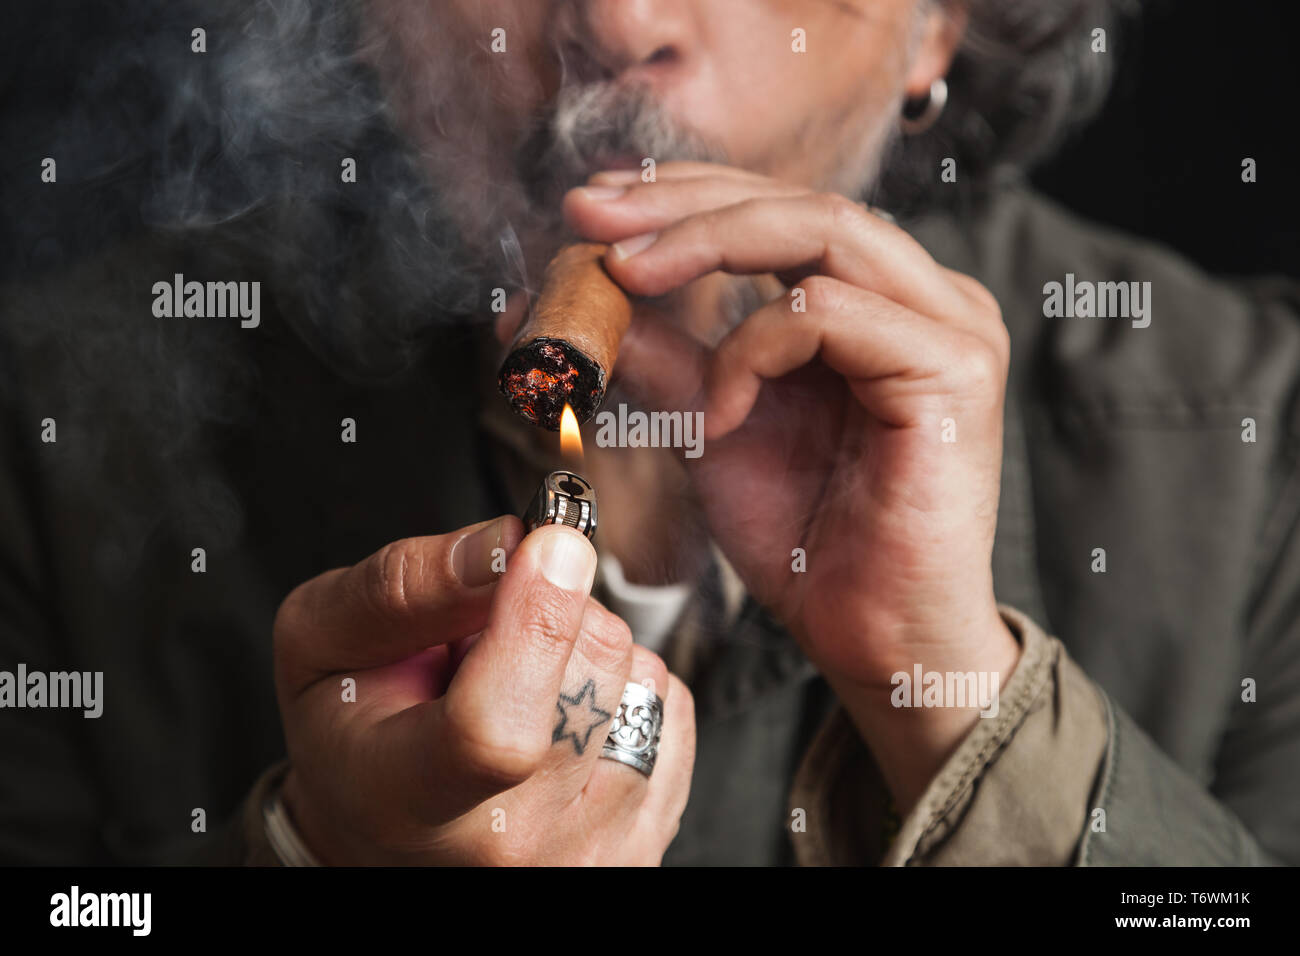 Closeup of hands of a middle aged man lighting up a cigar with a lighter, studio shot Stock Photo